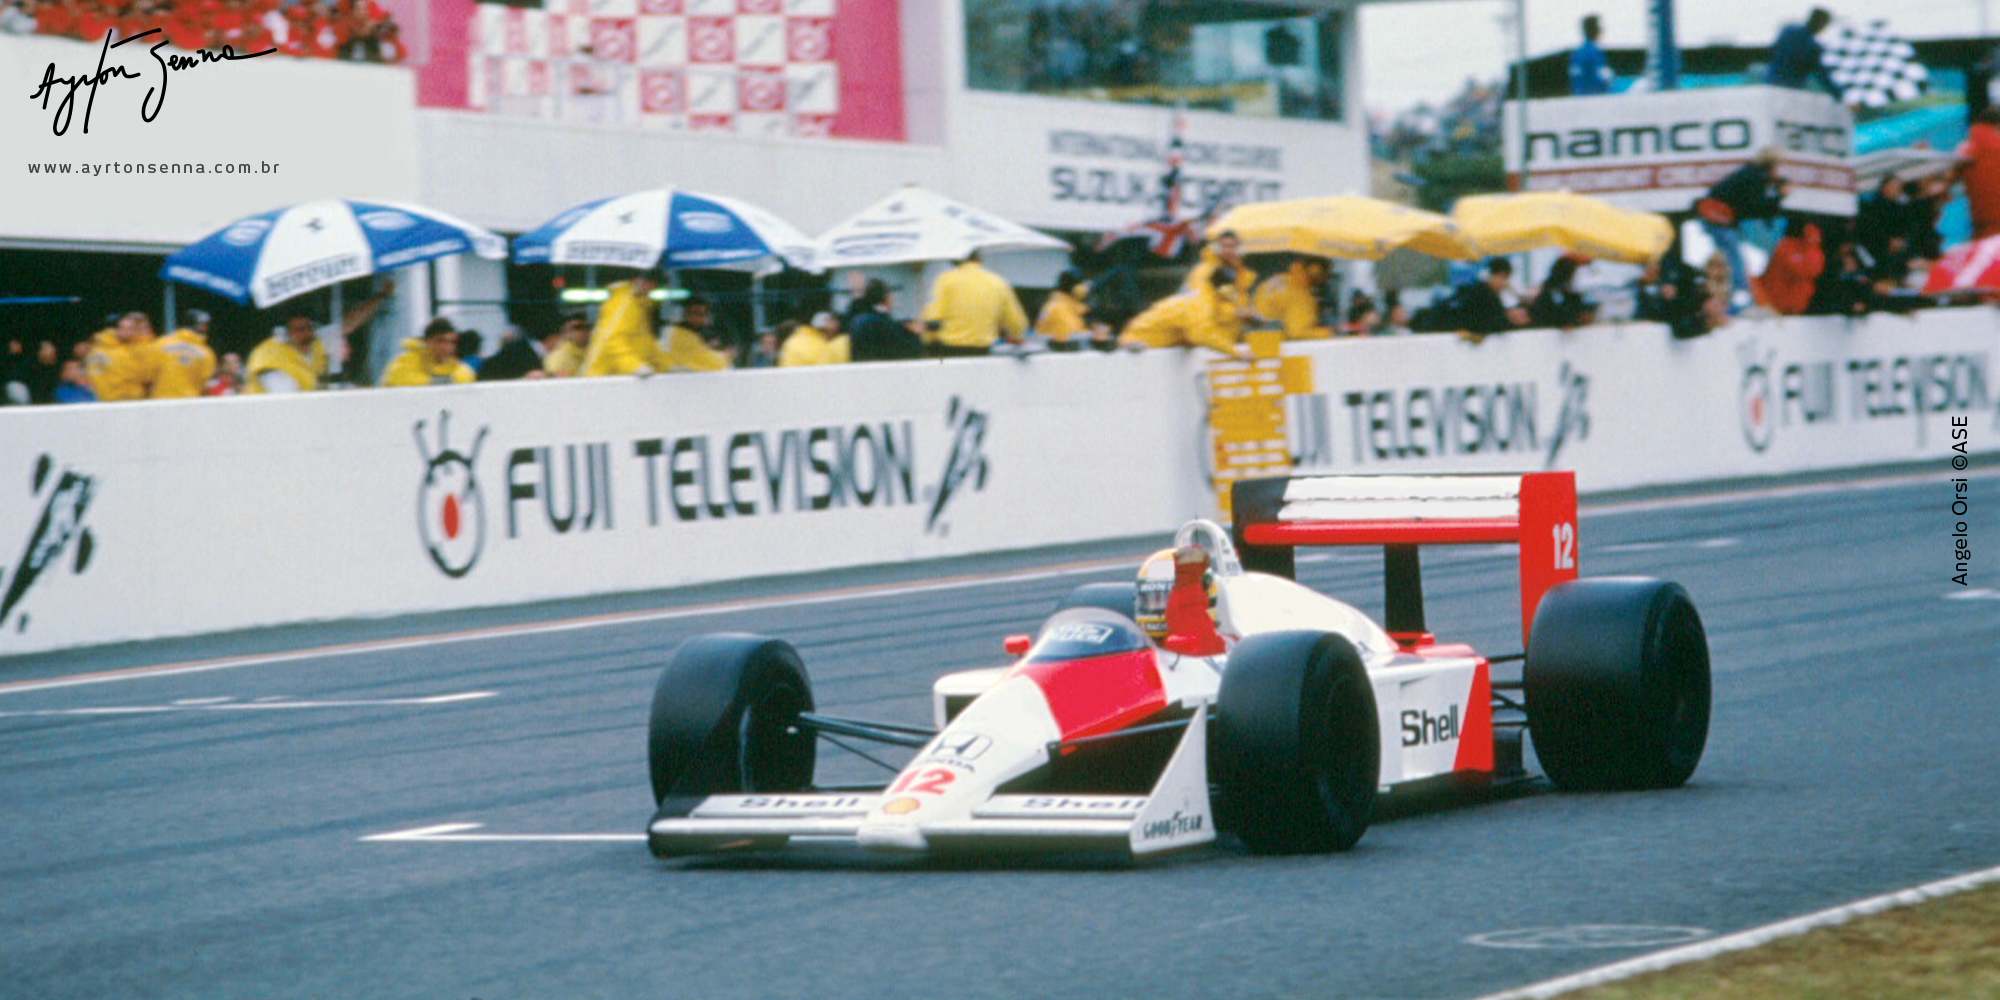 1988 Japanese Grand Prix - The title race - The history of Ayrton 